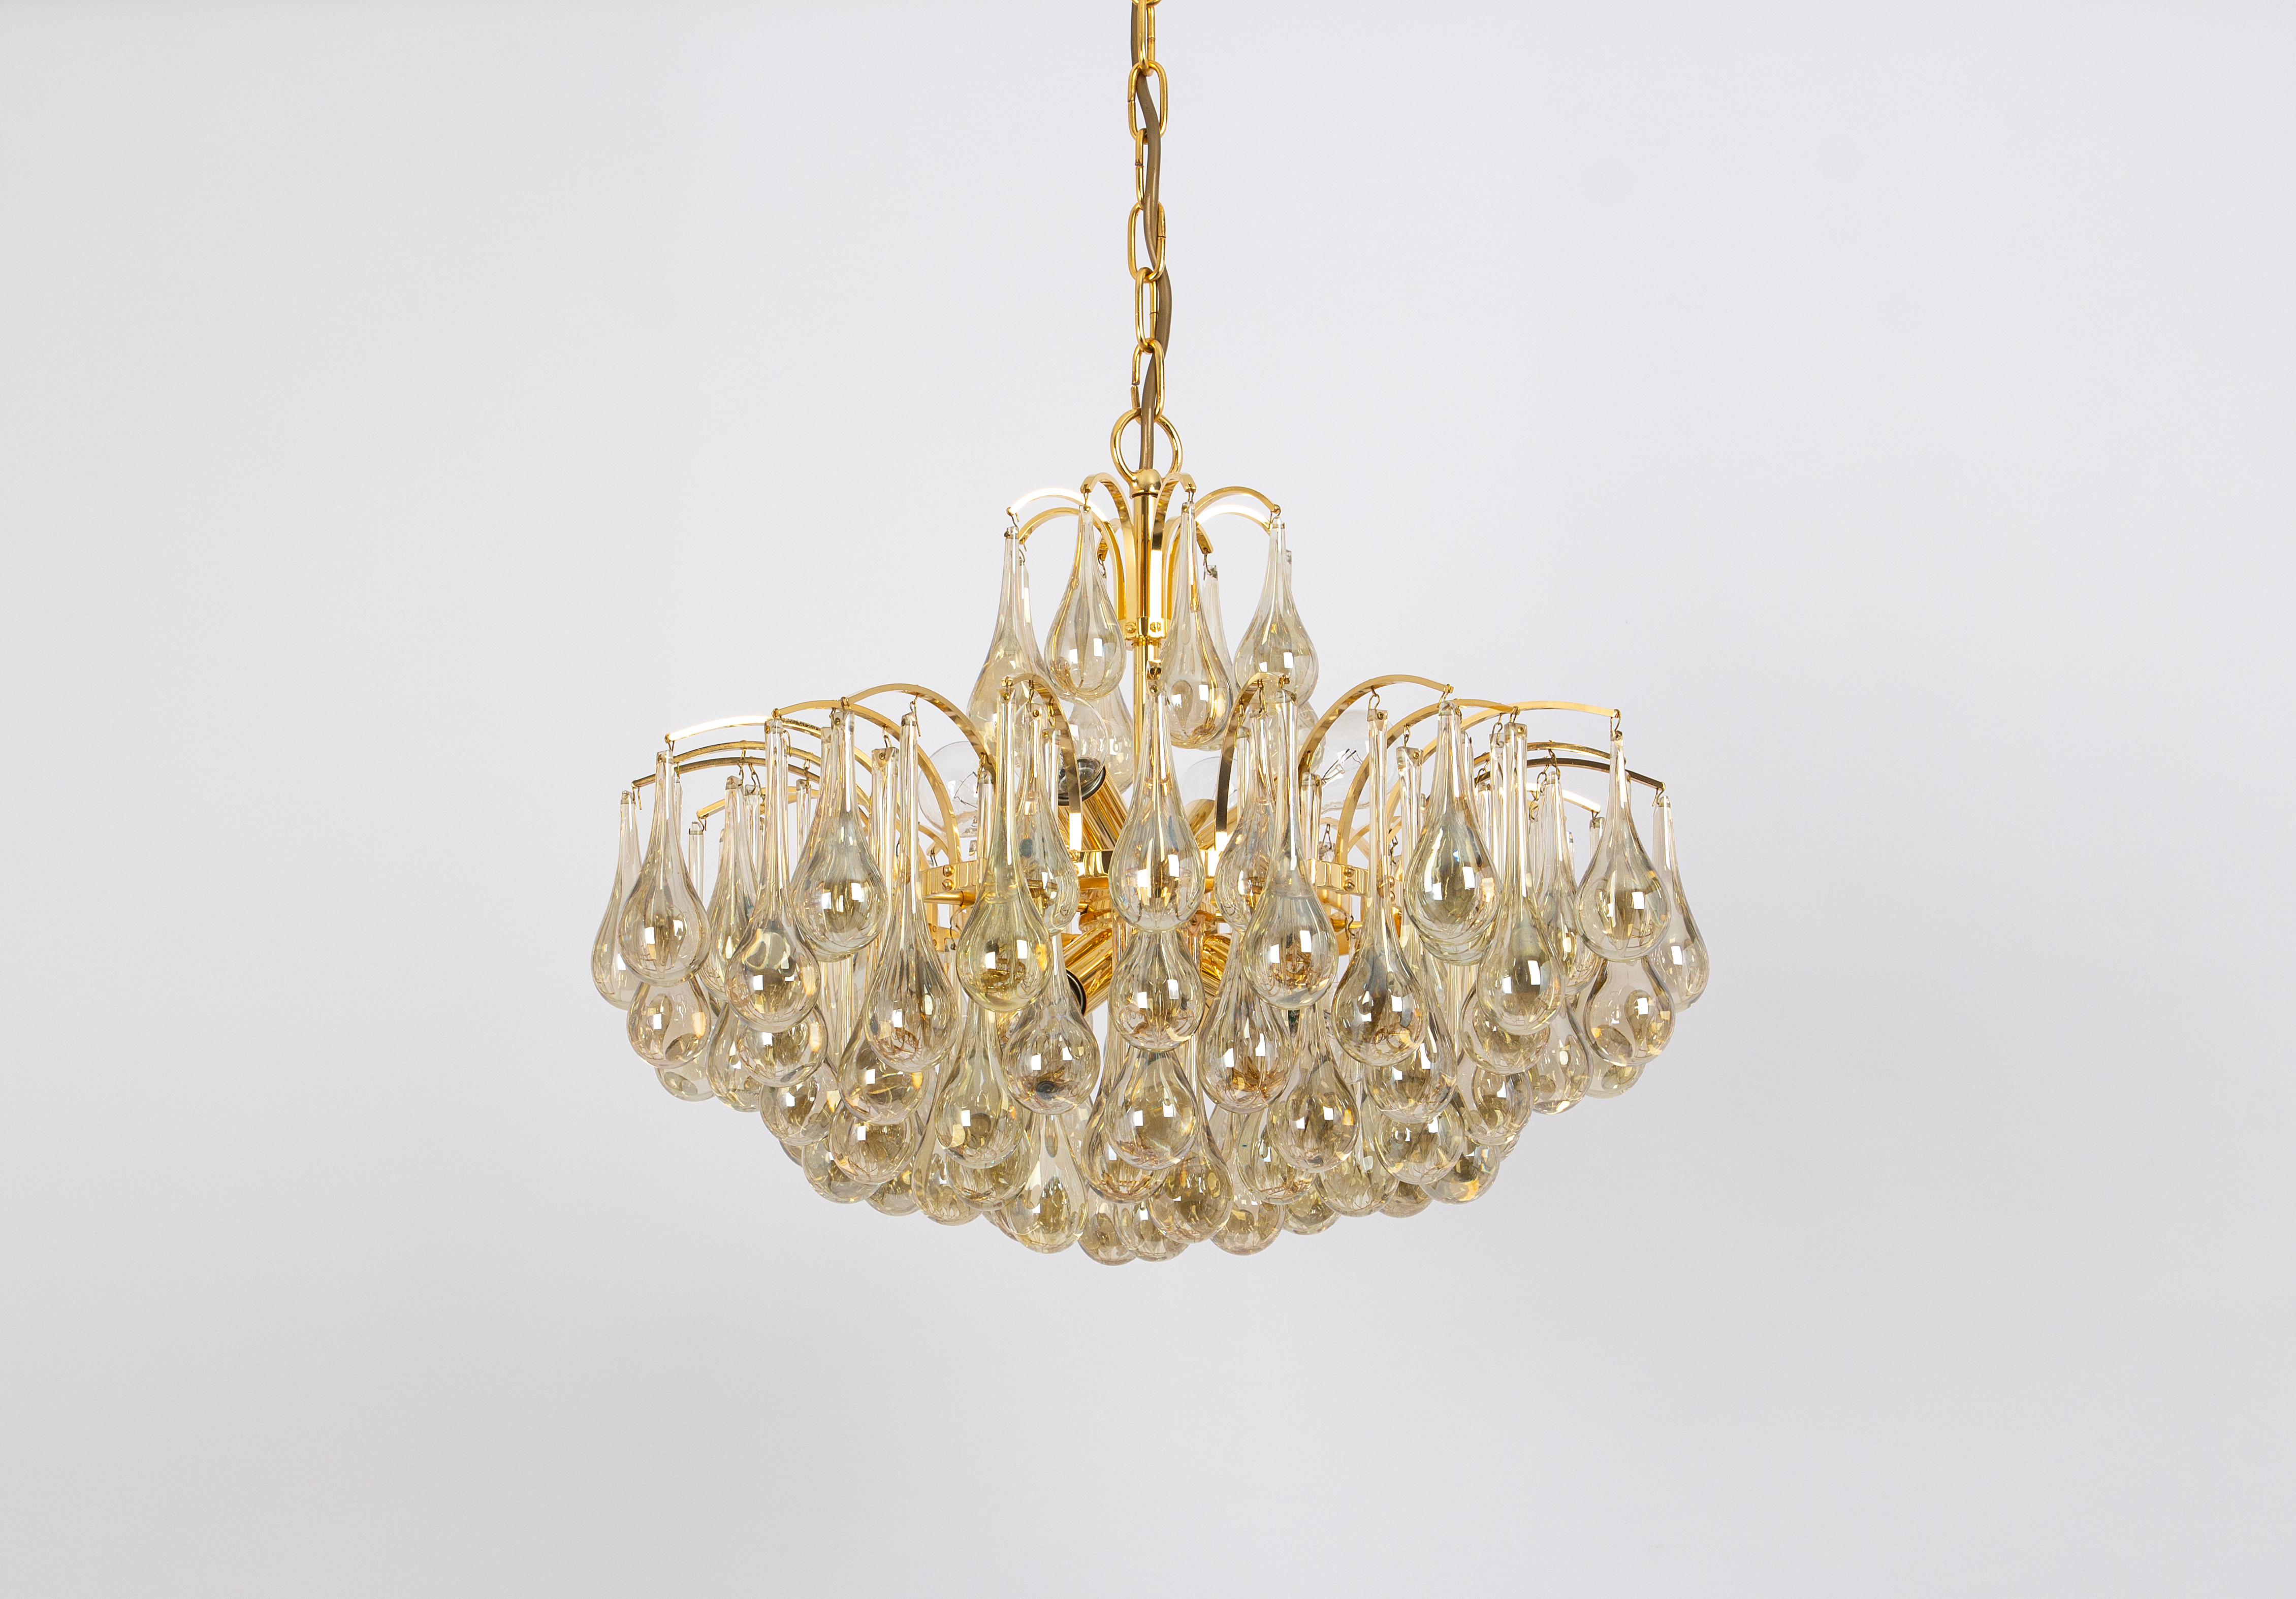 Large Murano Glass Tear Drop Chandelier, Christoph Palme, Germany, 1970s For Sale 1